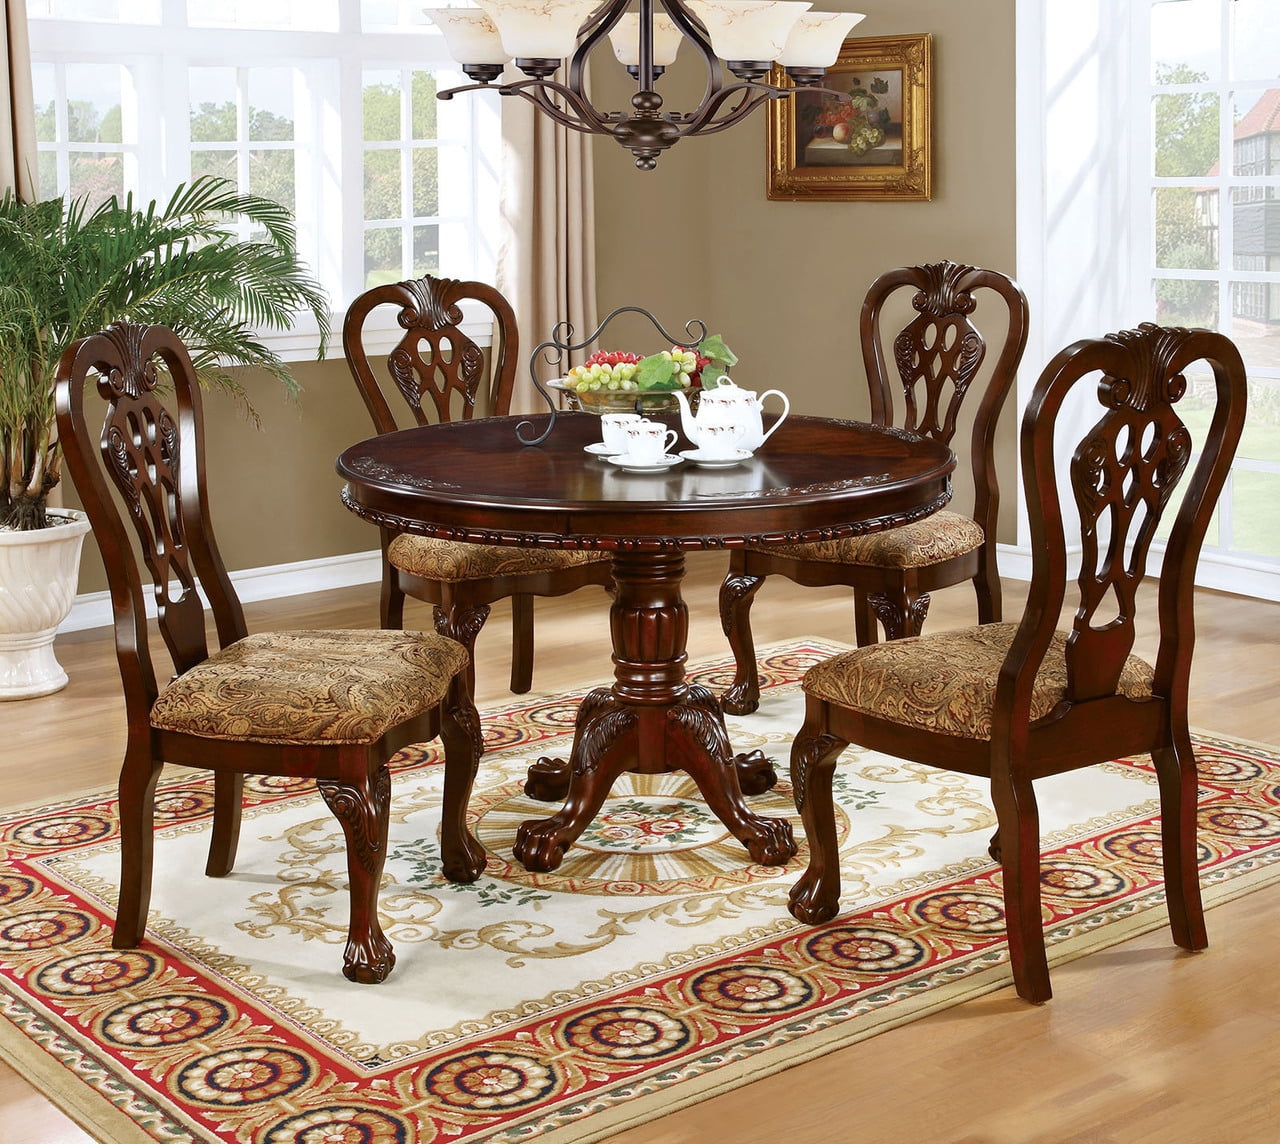 Unique Round Table With Chairs for Small Space